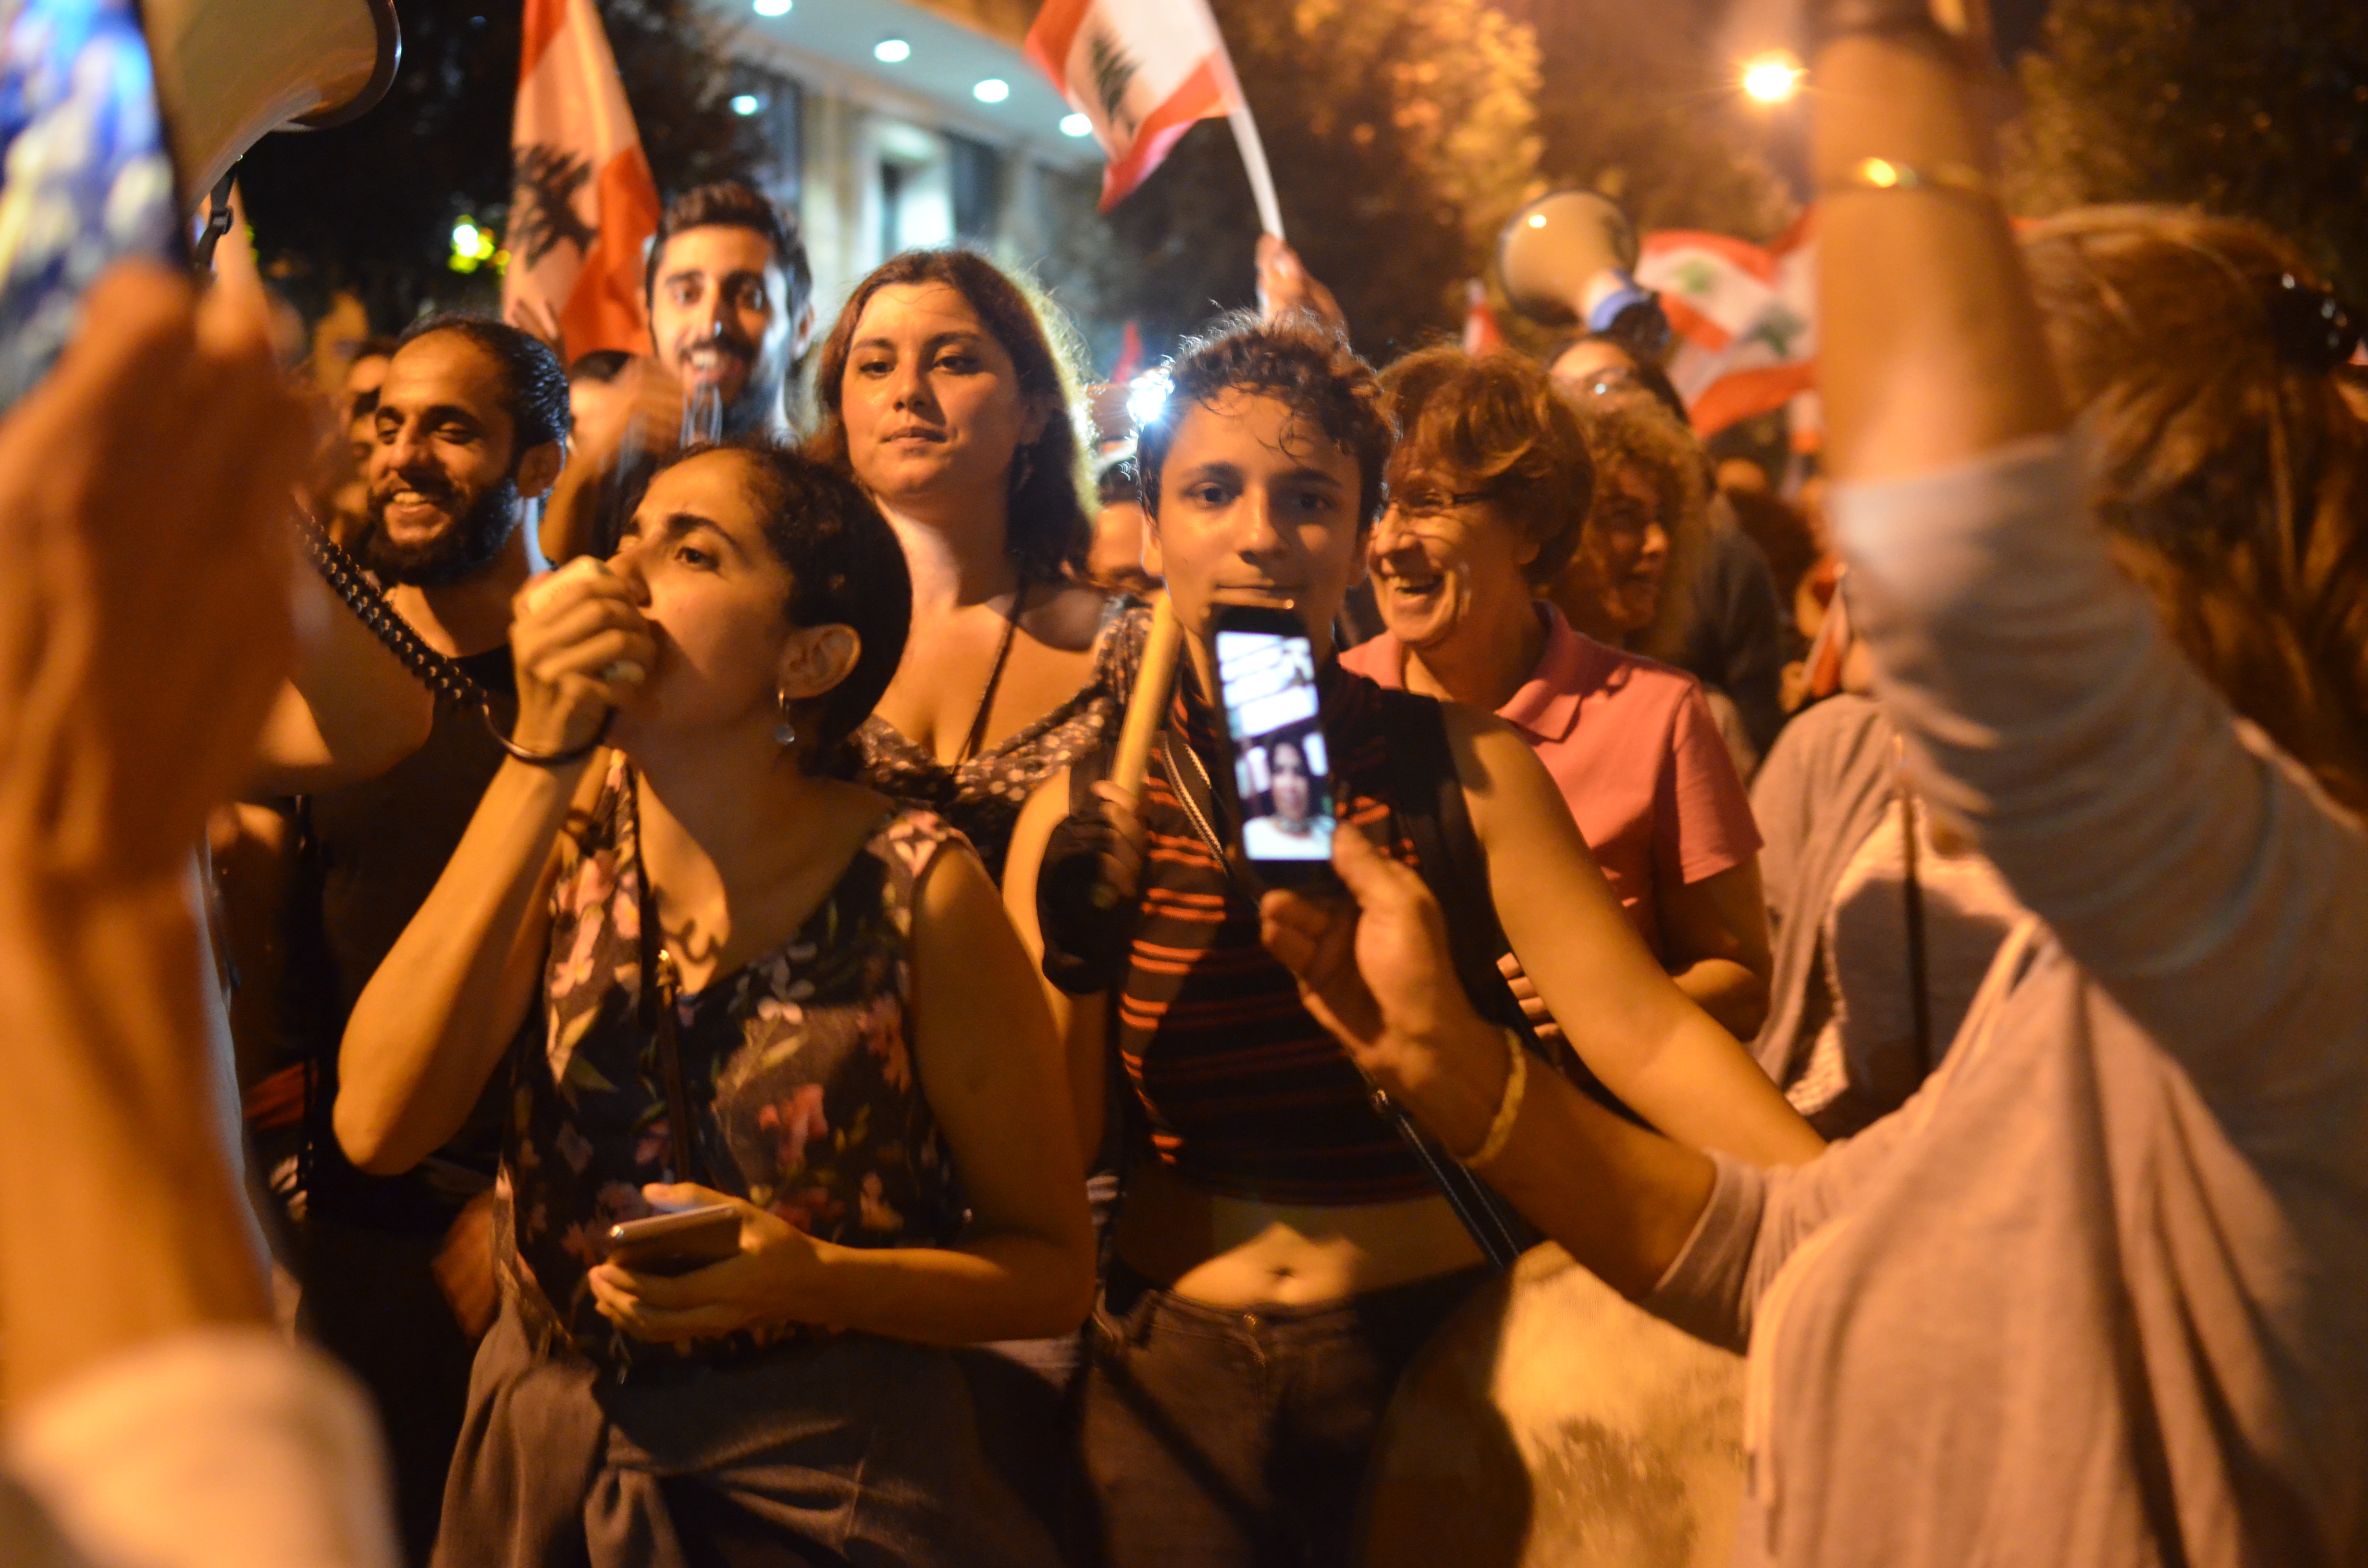 Women's rights activist Roula Seghaier (left of centre) at a demonstration in Beirut (photo: Julia Neumann)